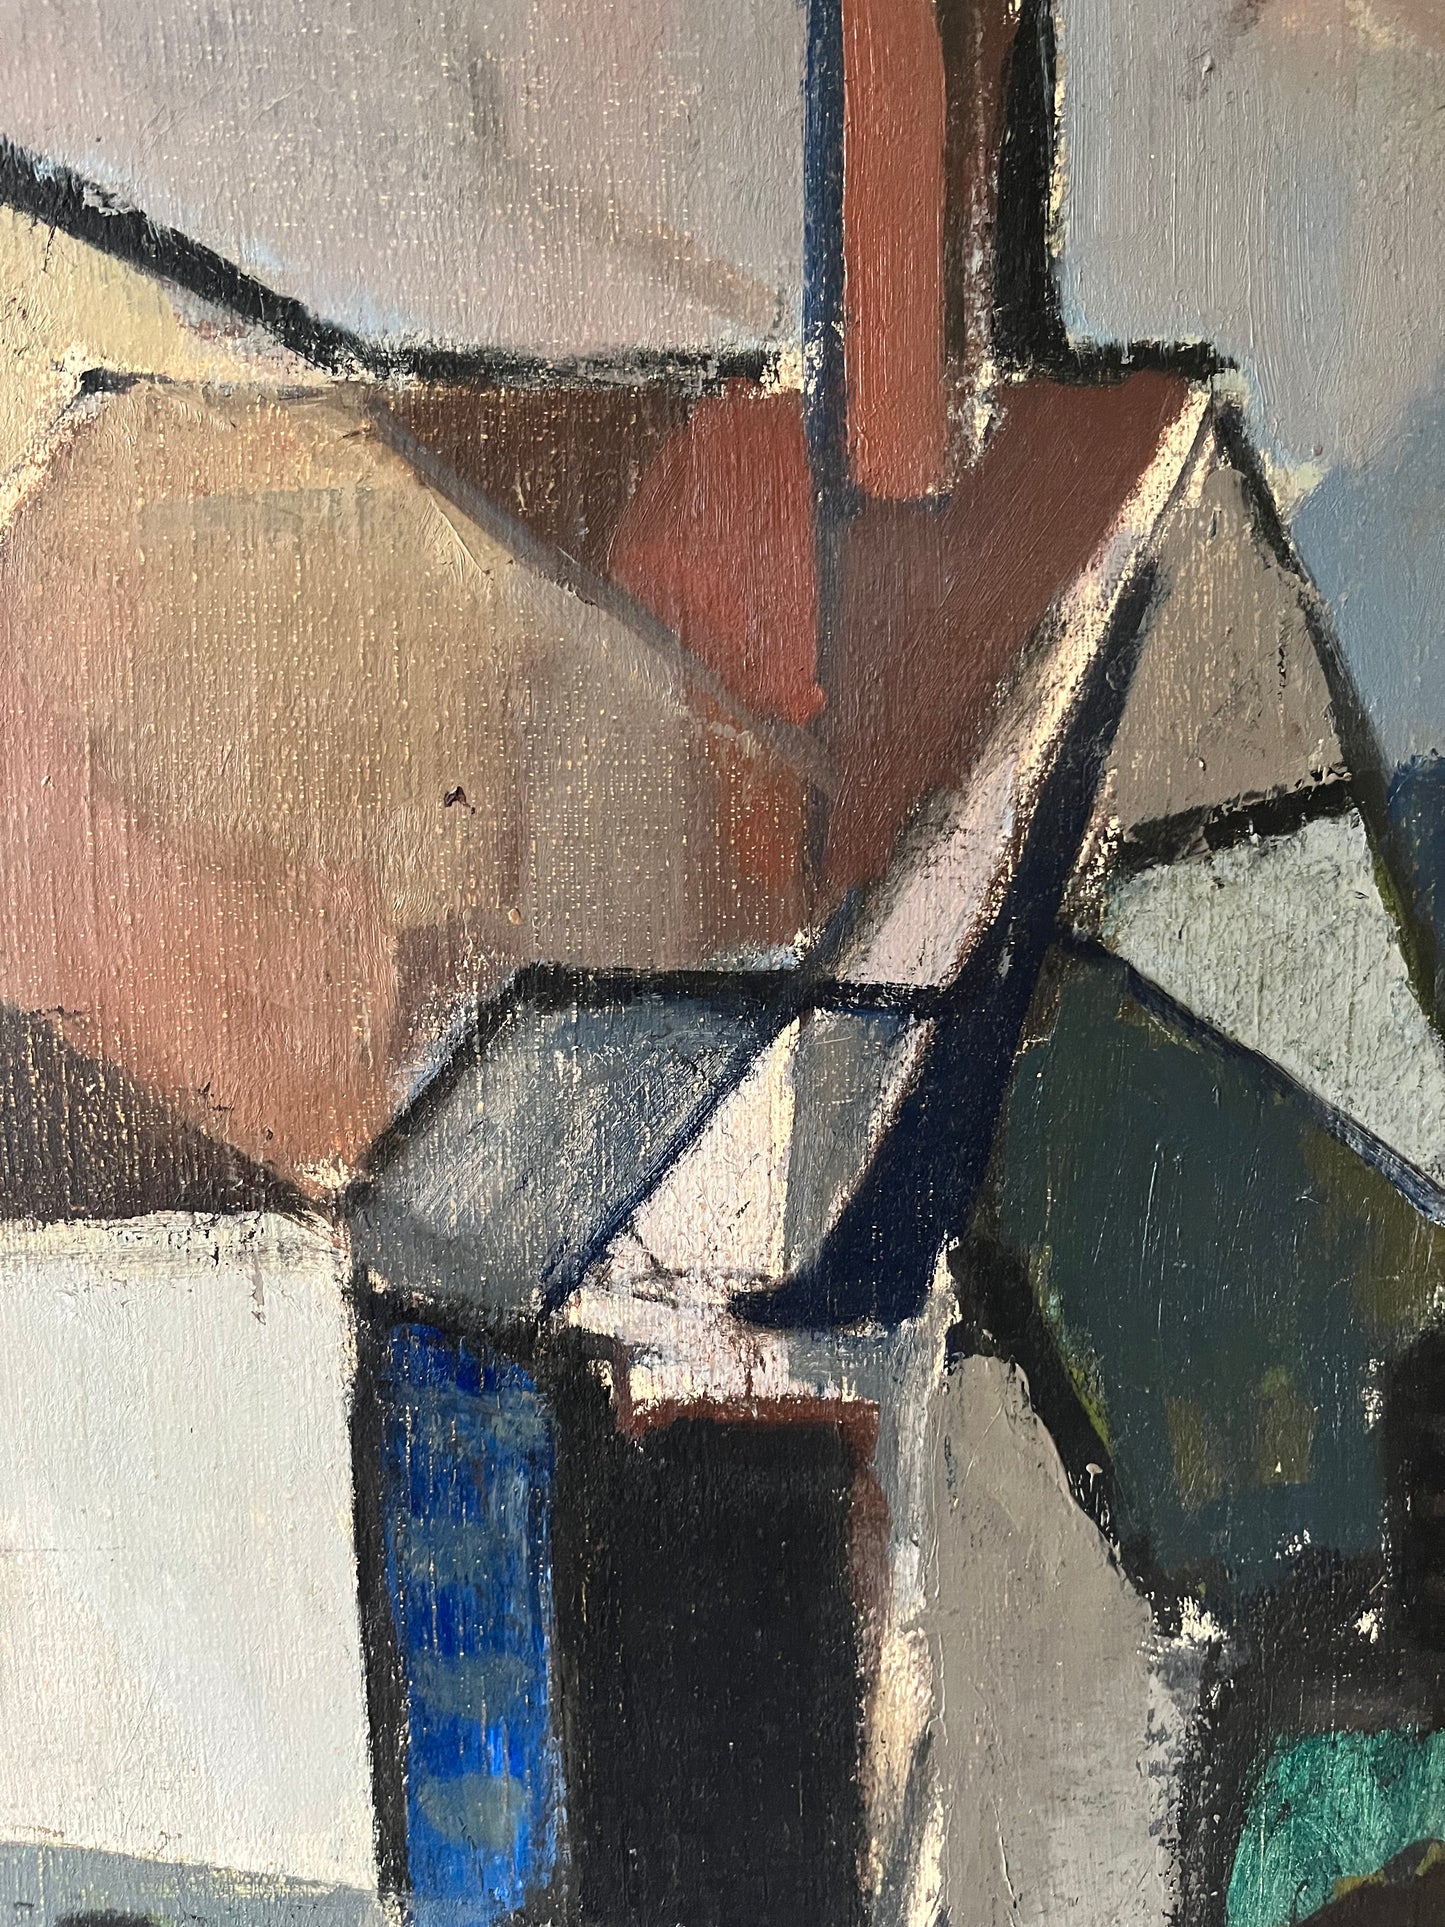 Patchwork houses